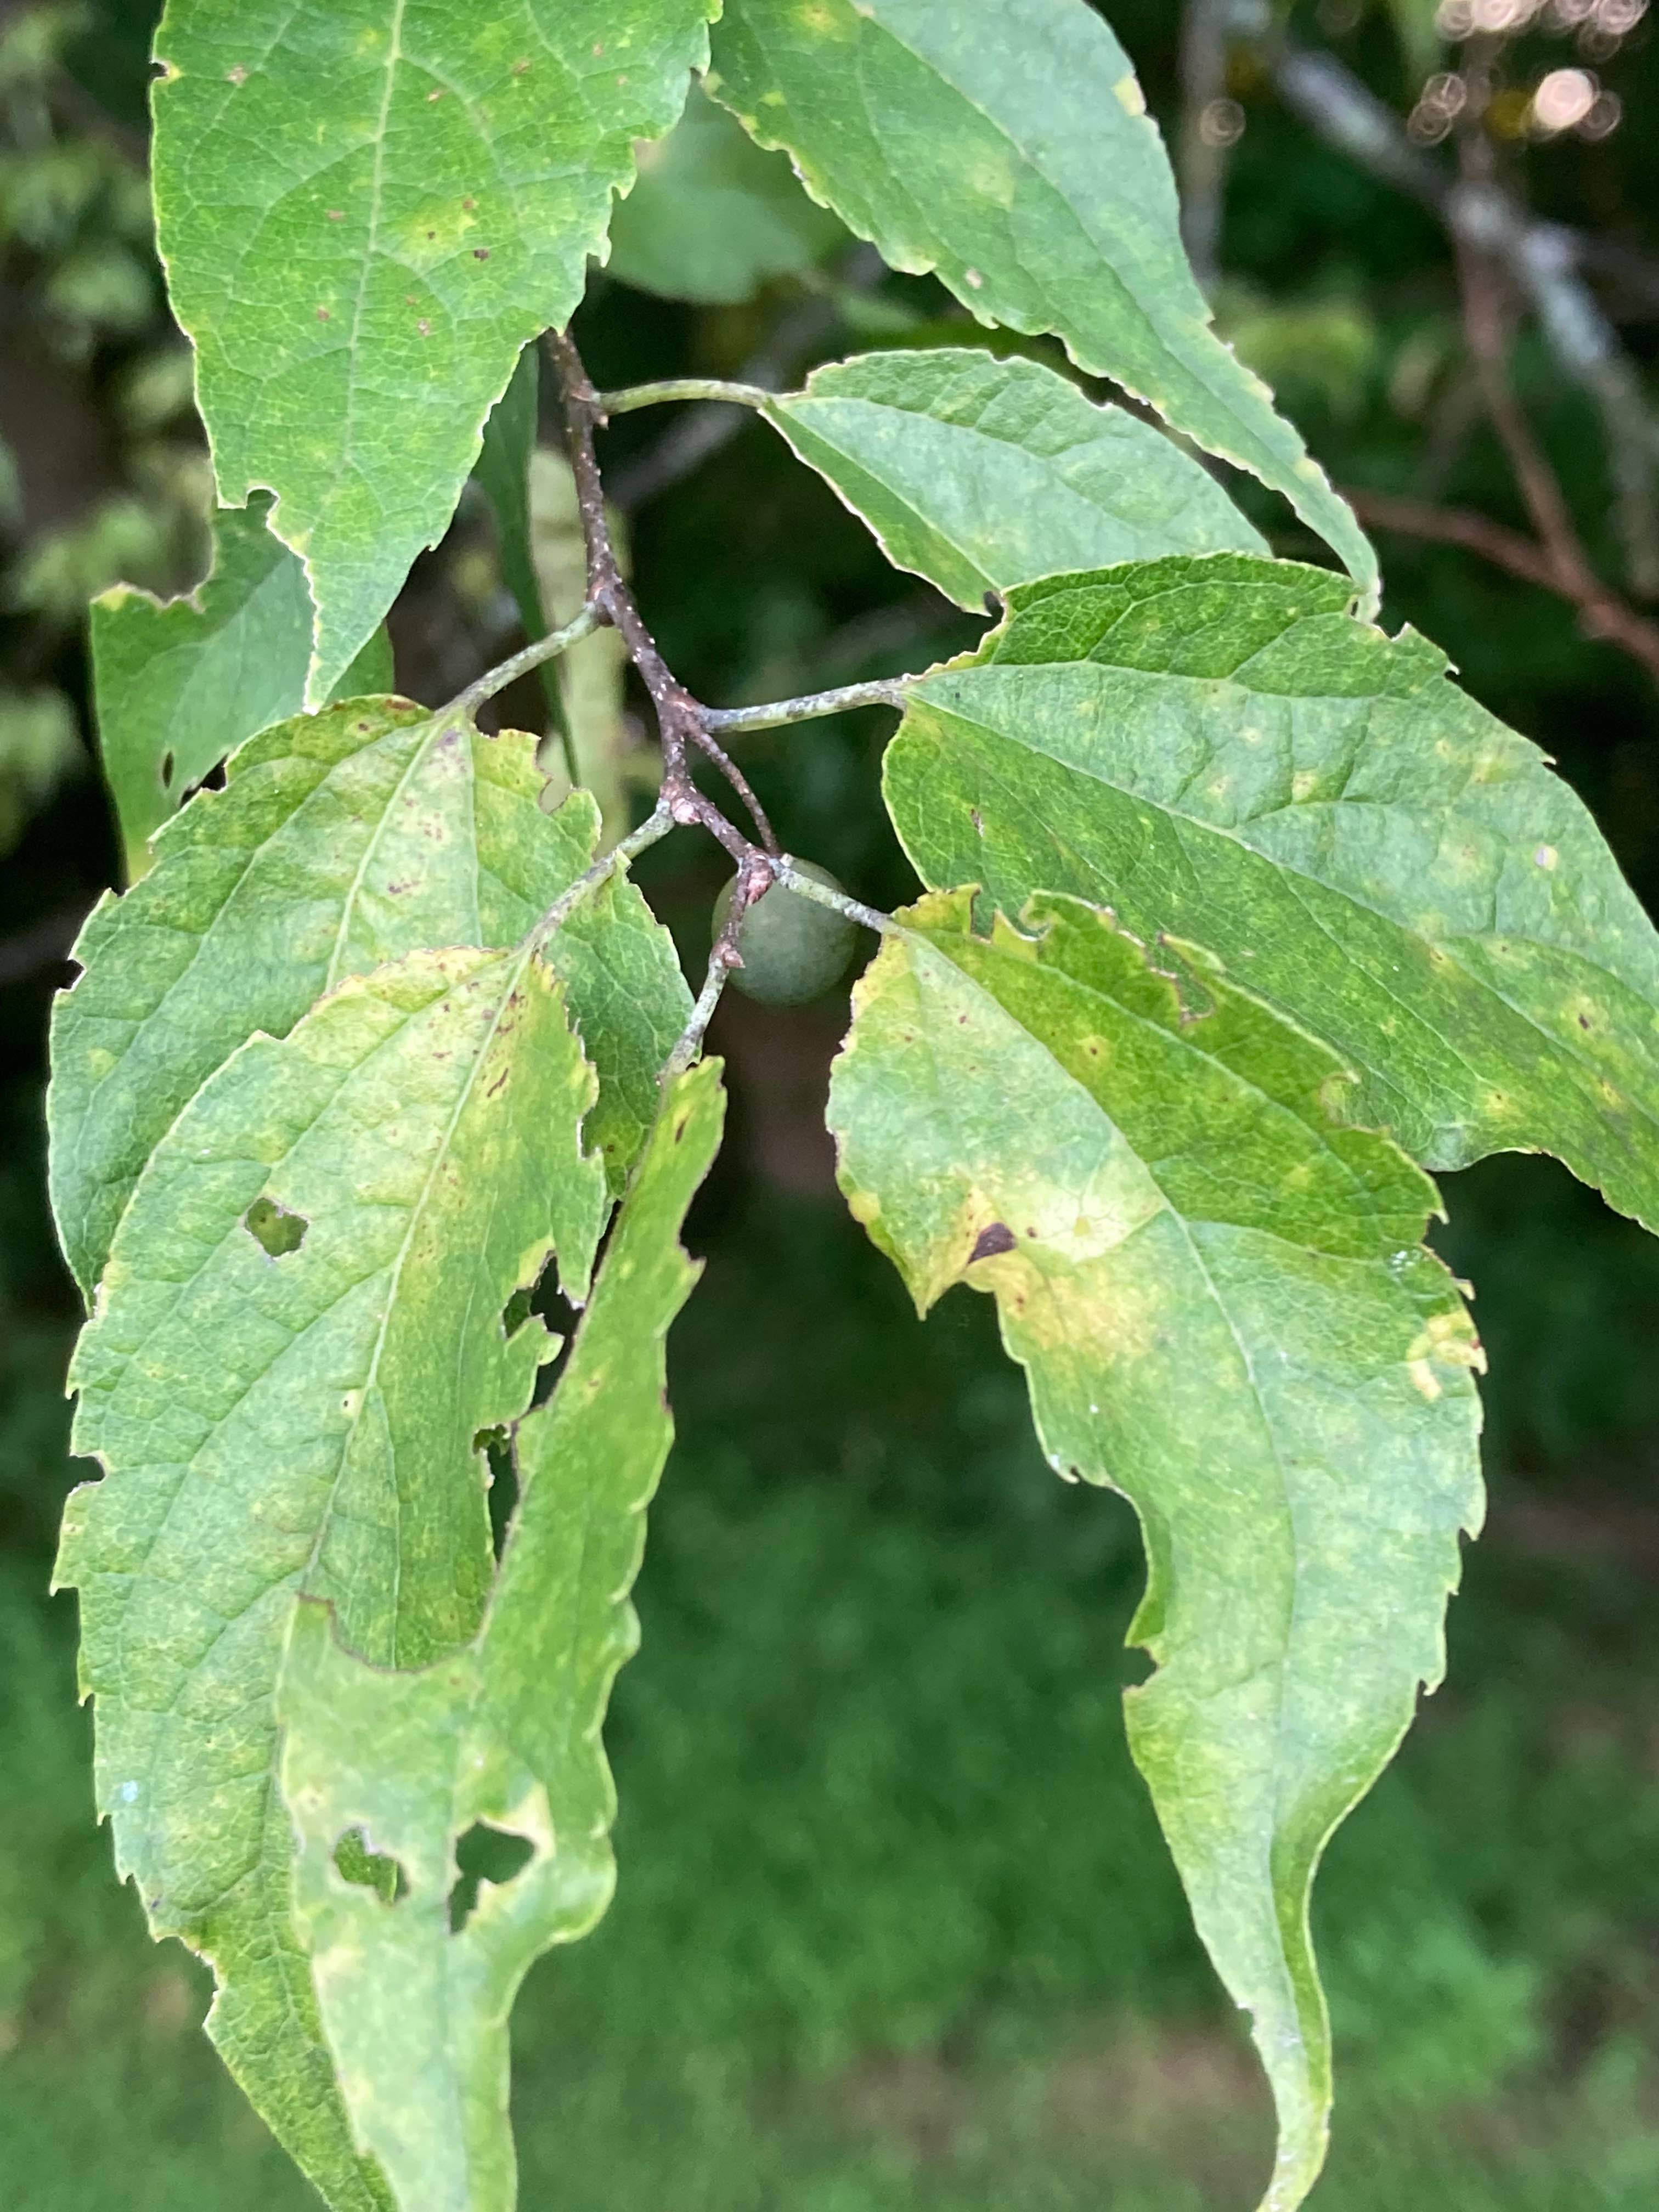 The Scientific Name is Celtis laevigata. You will likely hear them called Southern Hackberry, Sugarberry. This picture shows the The leaves are alternate, lanceolate with a tapering tip, and have slightly serrated margins. The leaves subtending the fruits have margins that are entire or with only 1-2 teeth on one side only. The leaves of <em>C.occidentalis</em> are more ovate in shape.  of Celtis laevigata